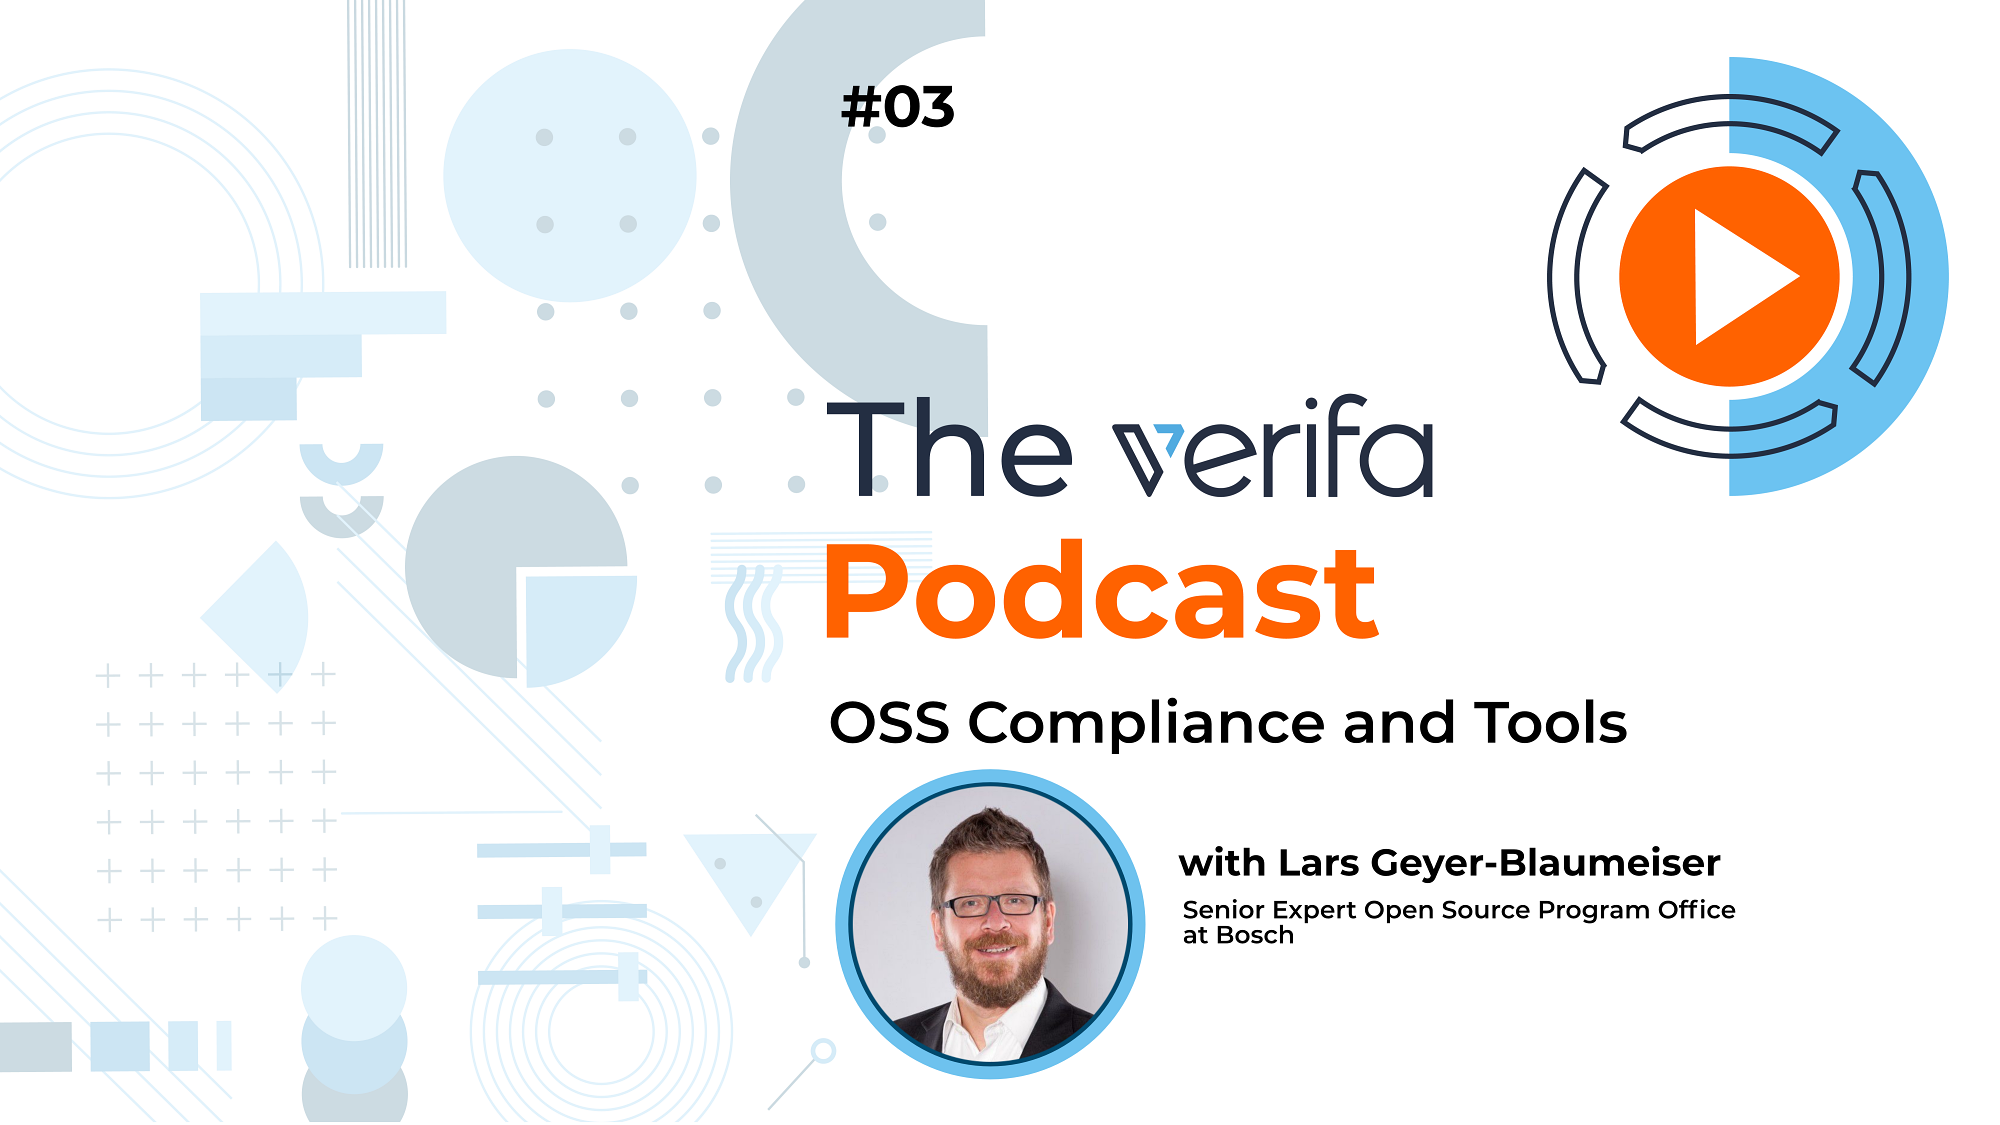 OSS Compliance and Tools with Lars Geyer-Blaumeiser